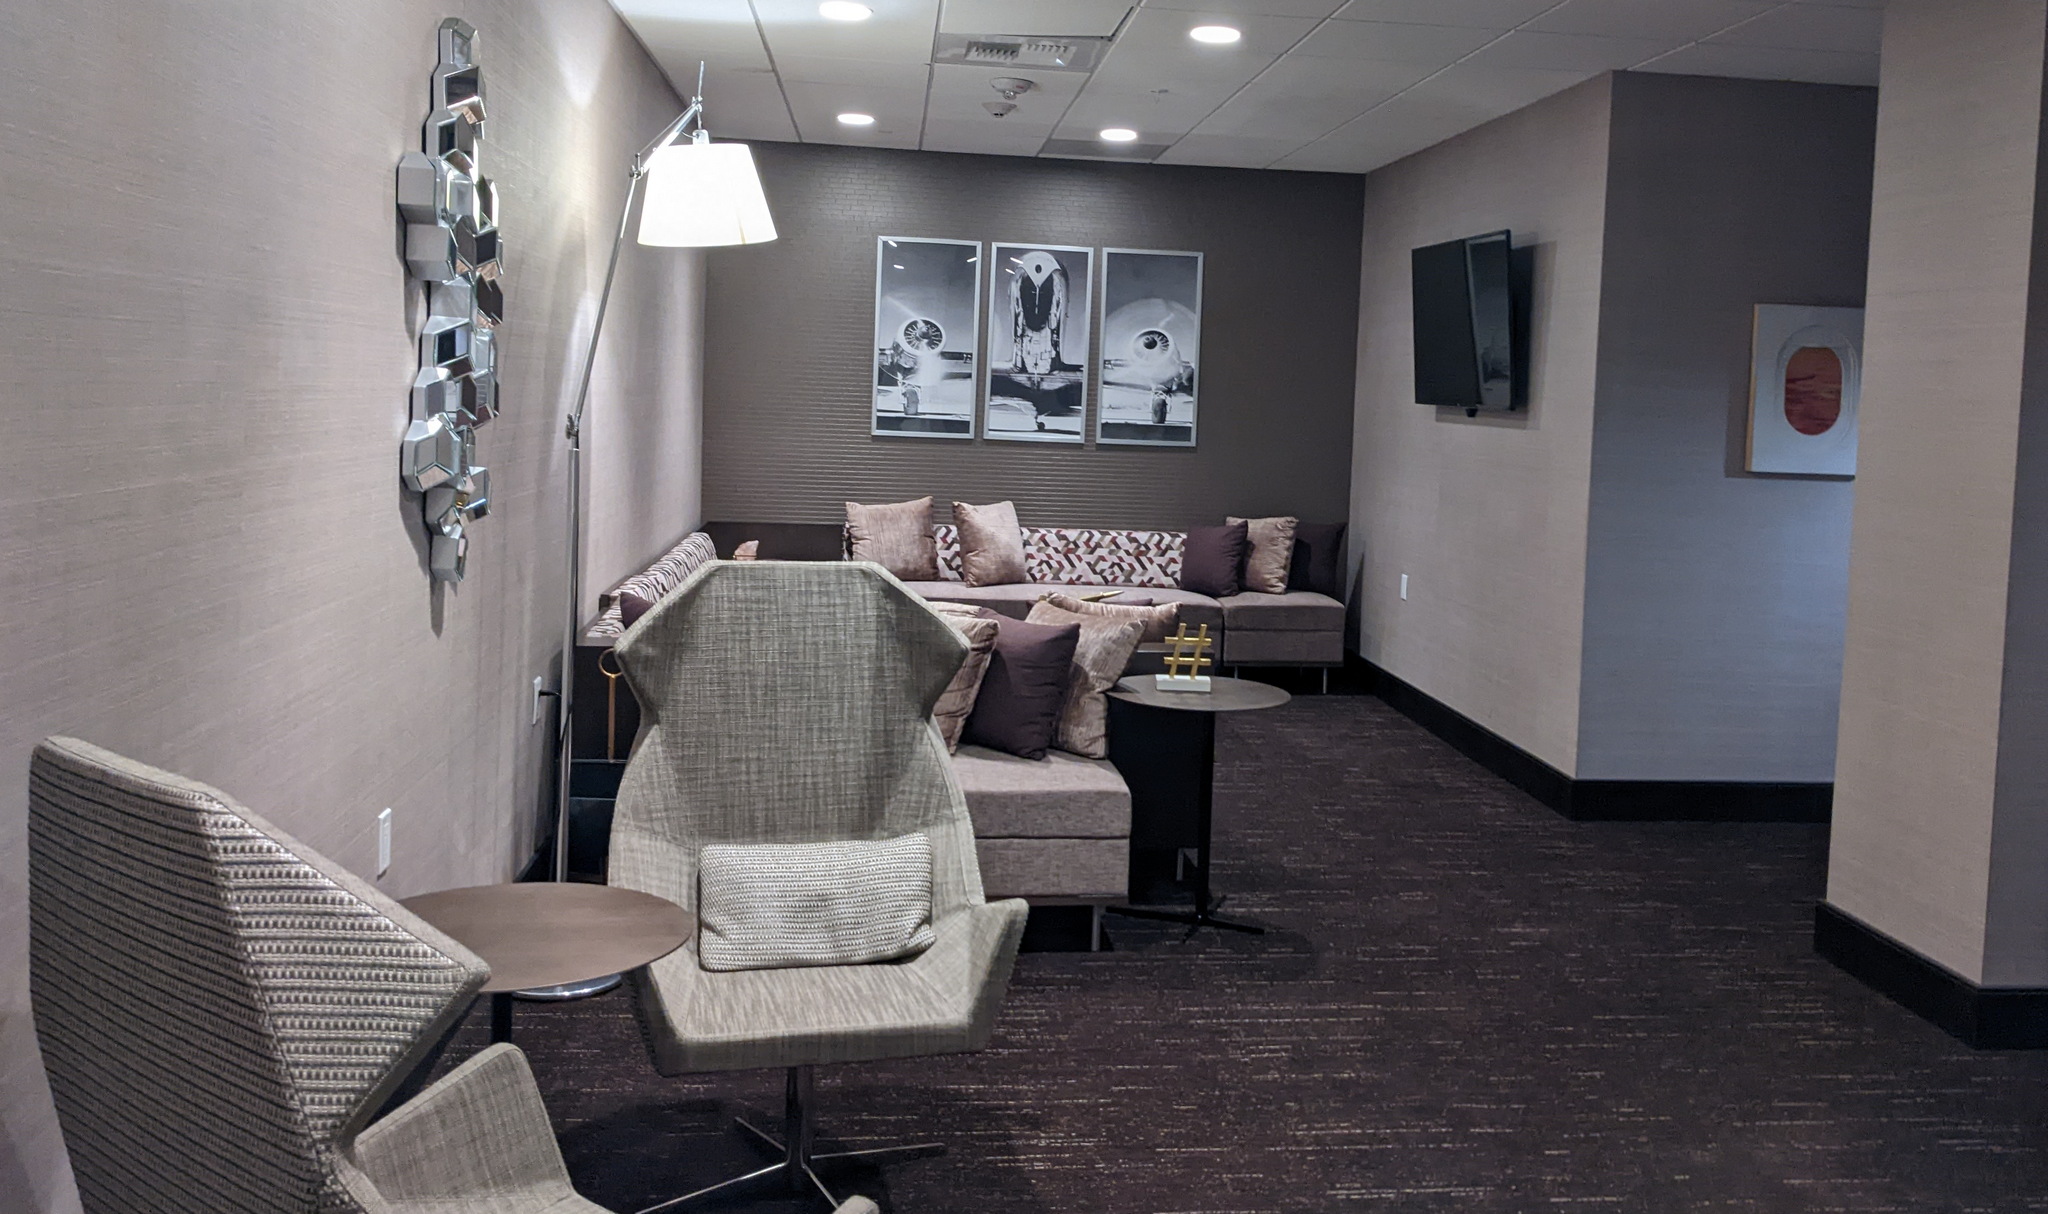 The Transfer Lounge lobby with chairs and TV